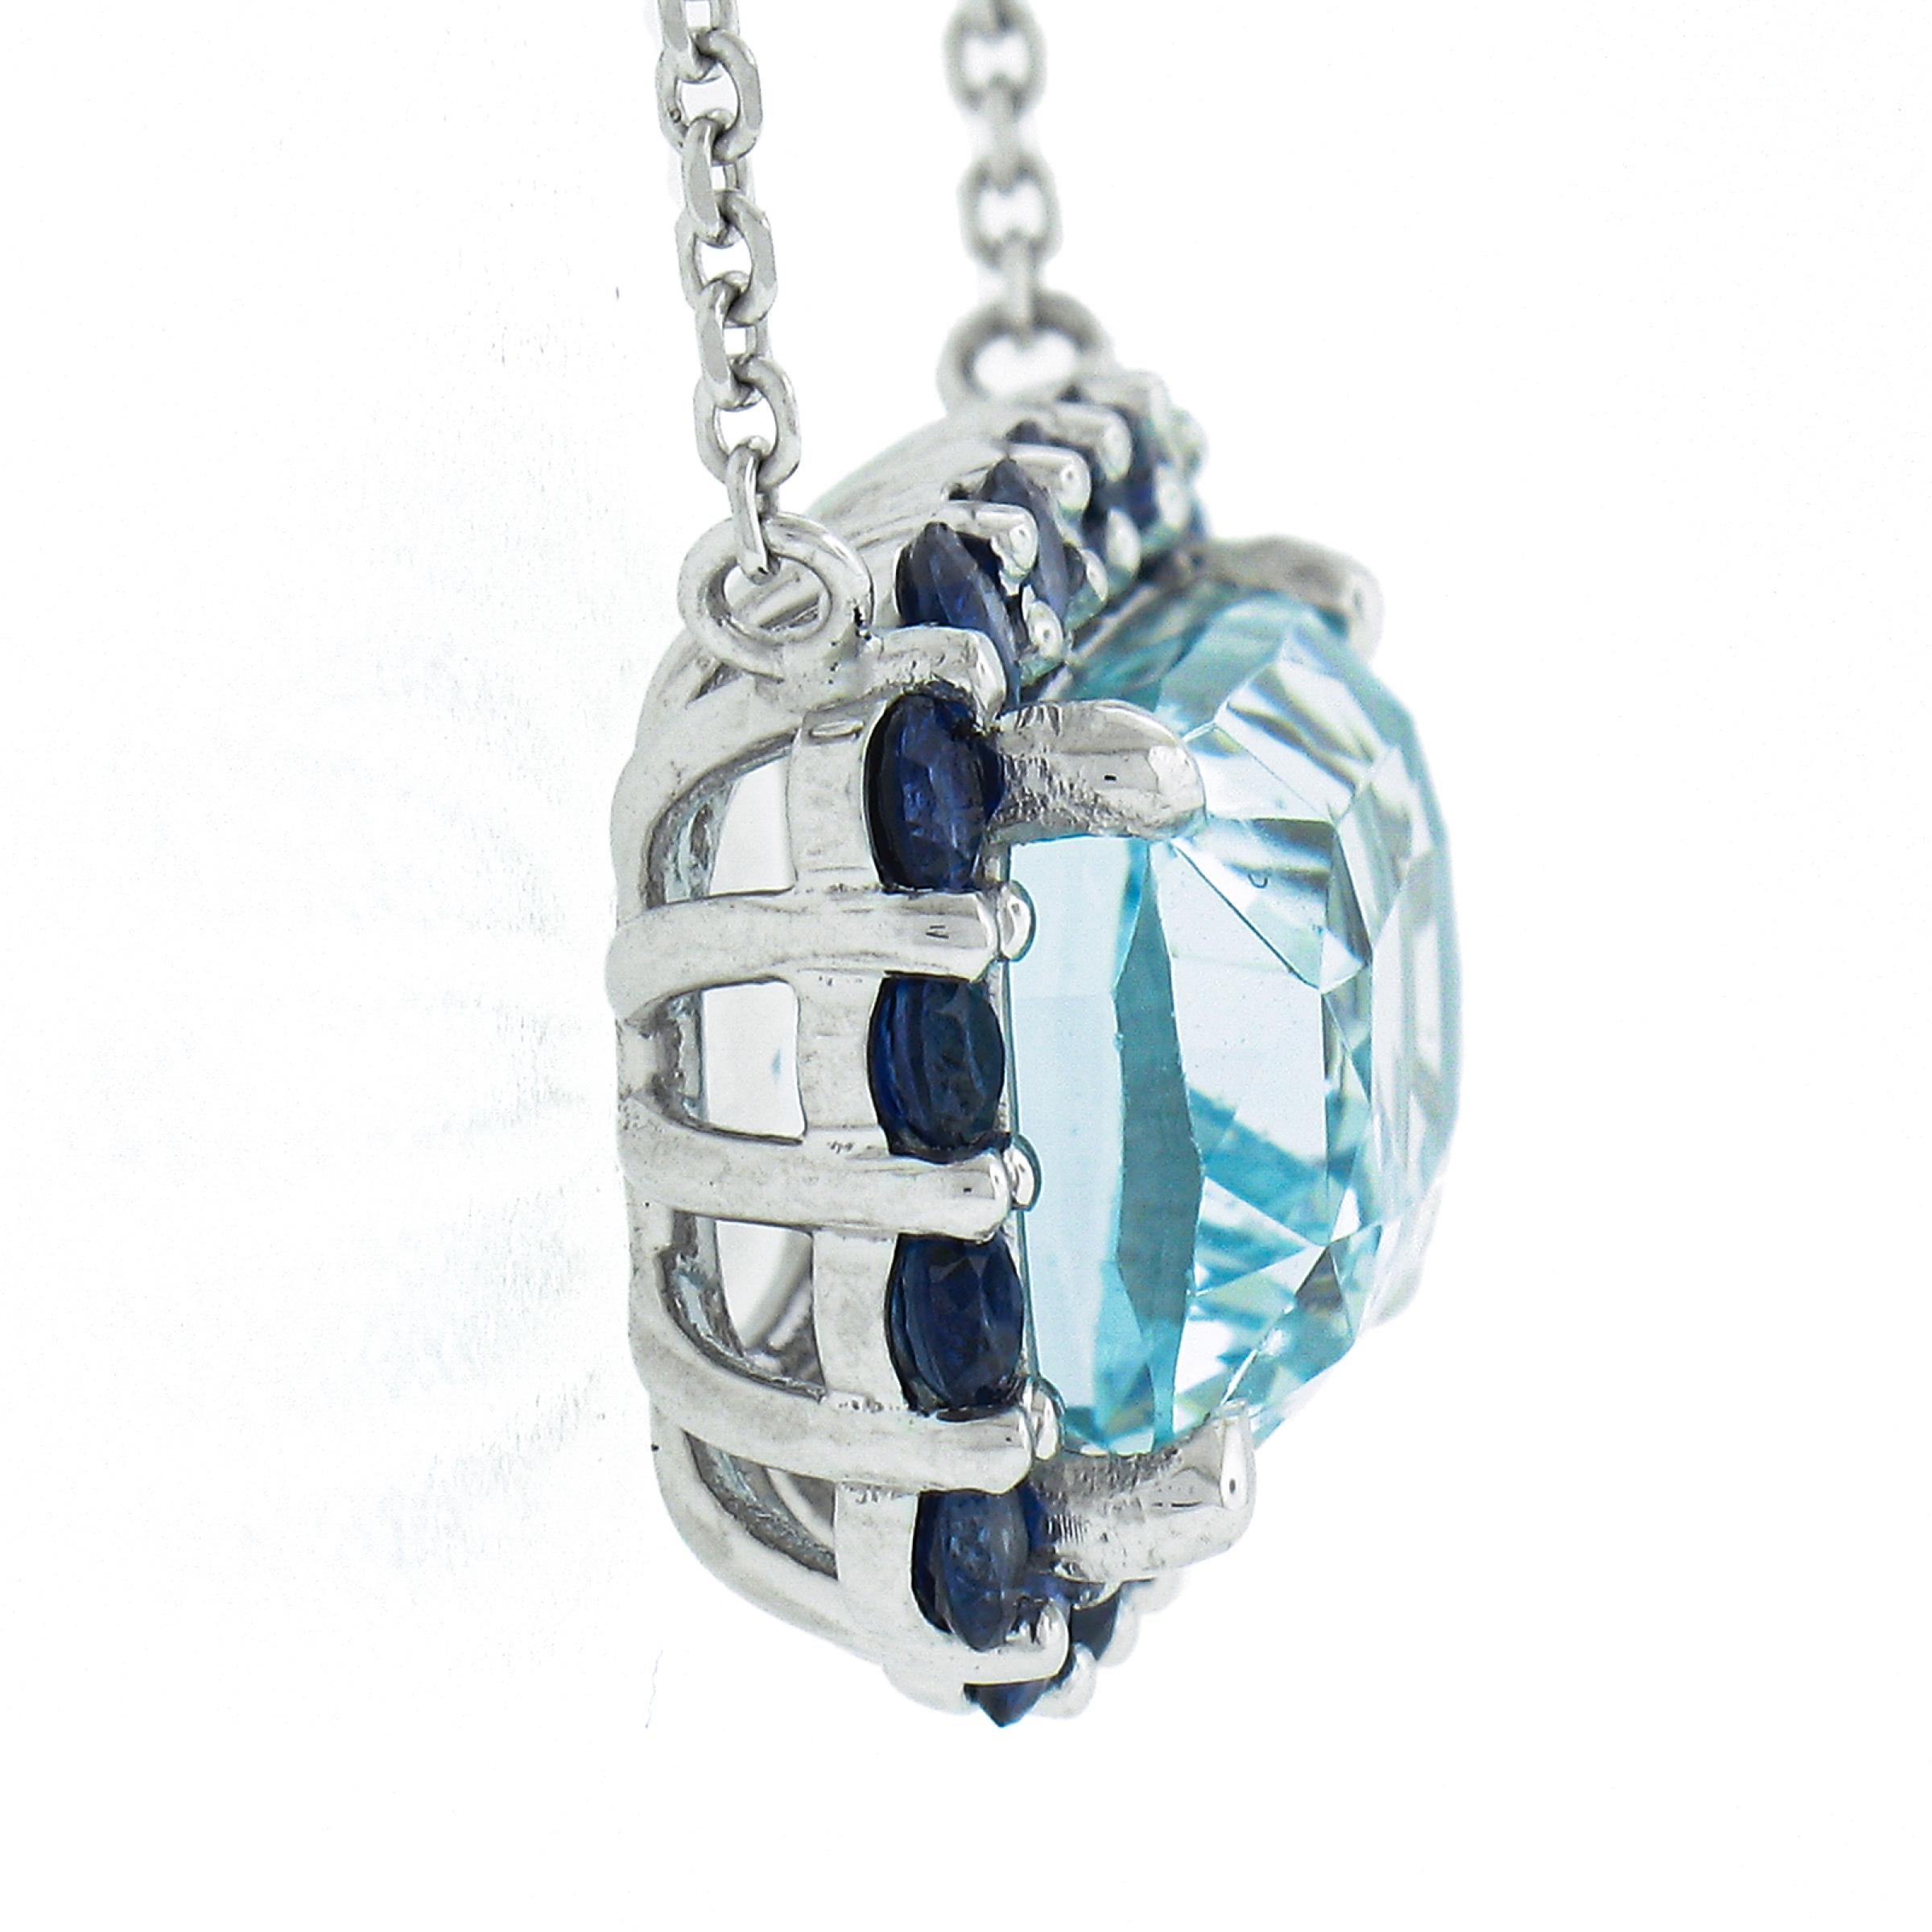 New 14k Gold 6.57ct Cushion Aquamarine & Sapphire Pendant & Adjustable Chain In New Condition For Sale In Montclair, NJ